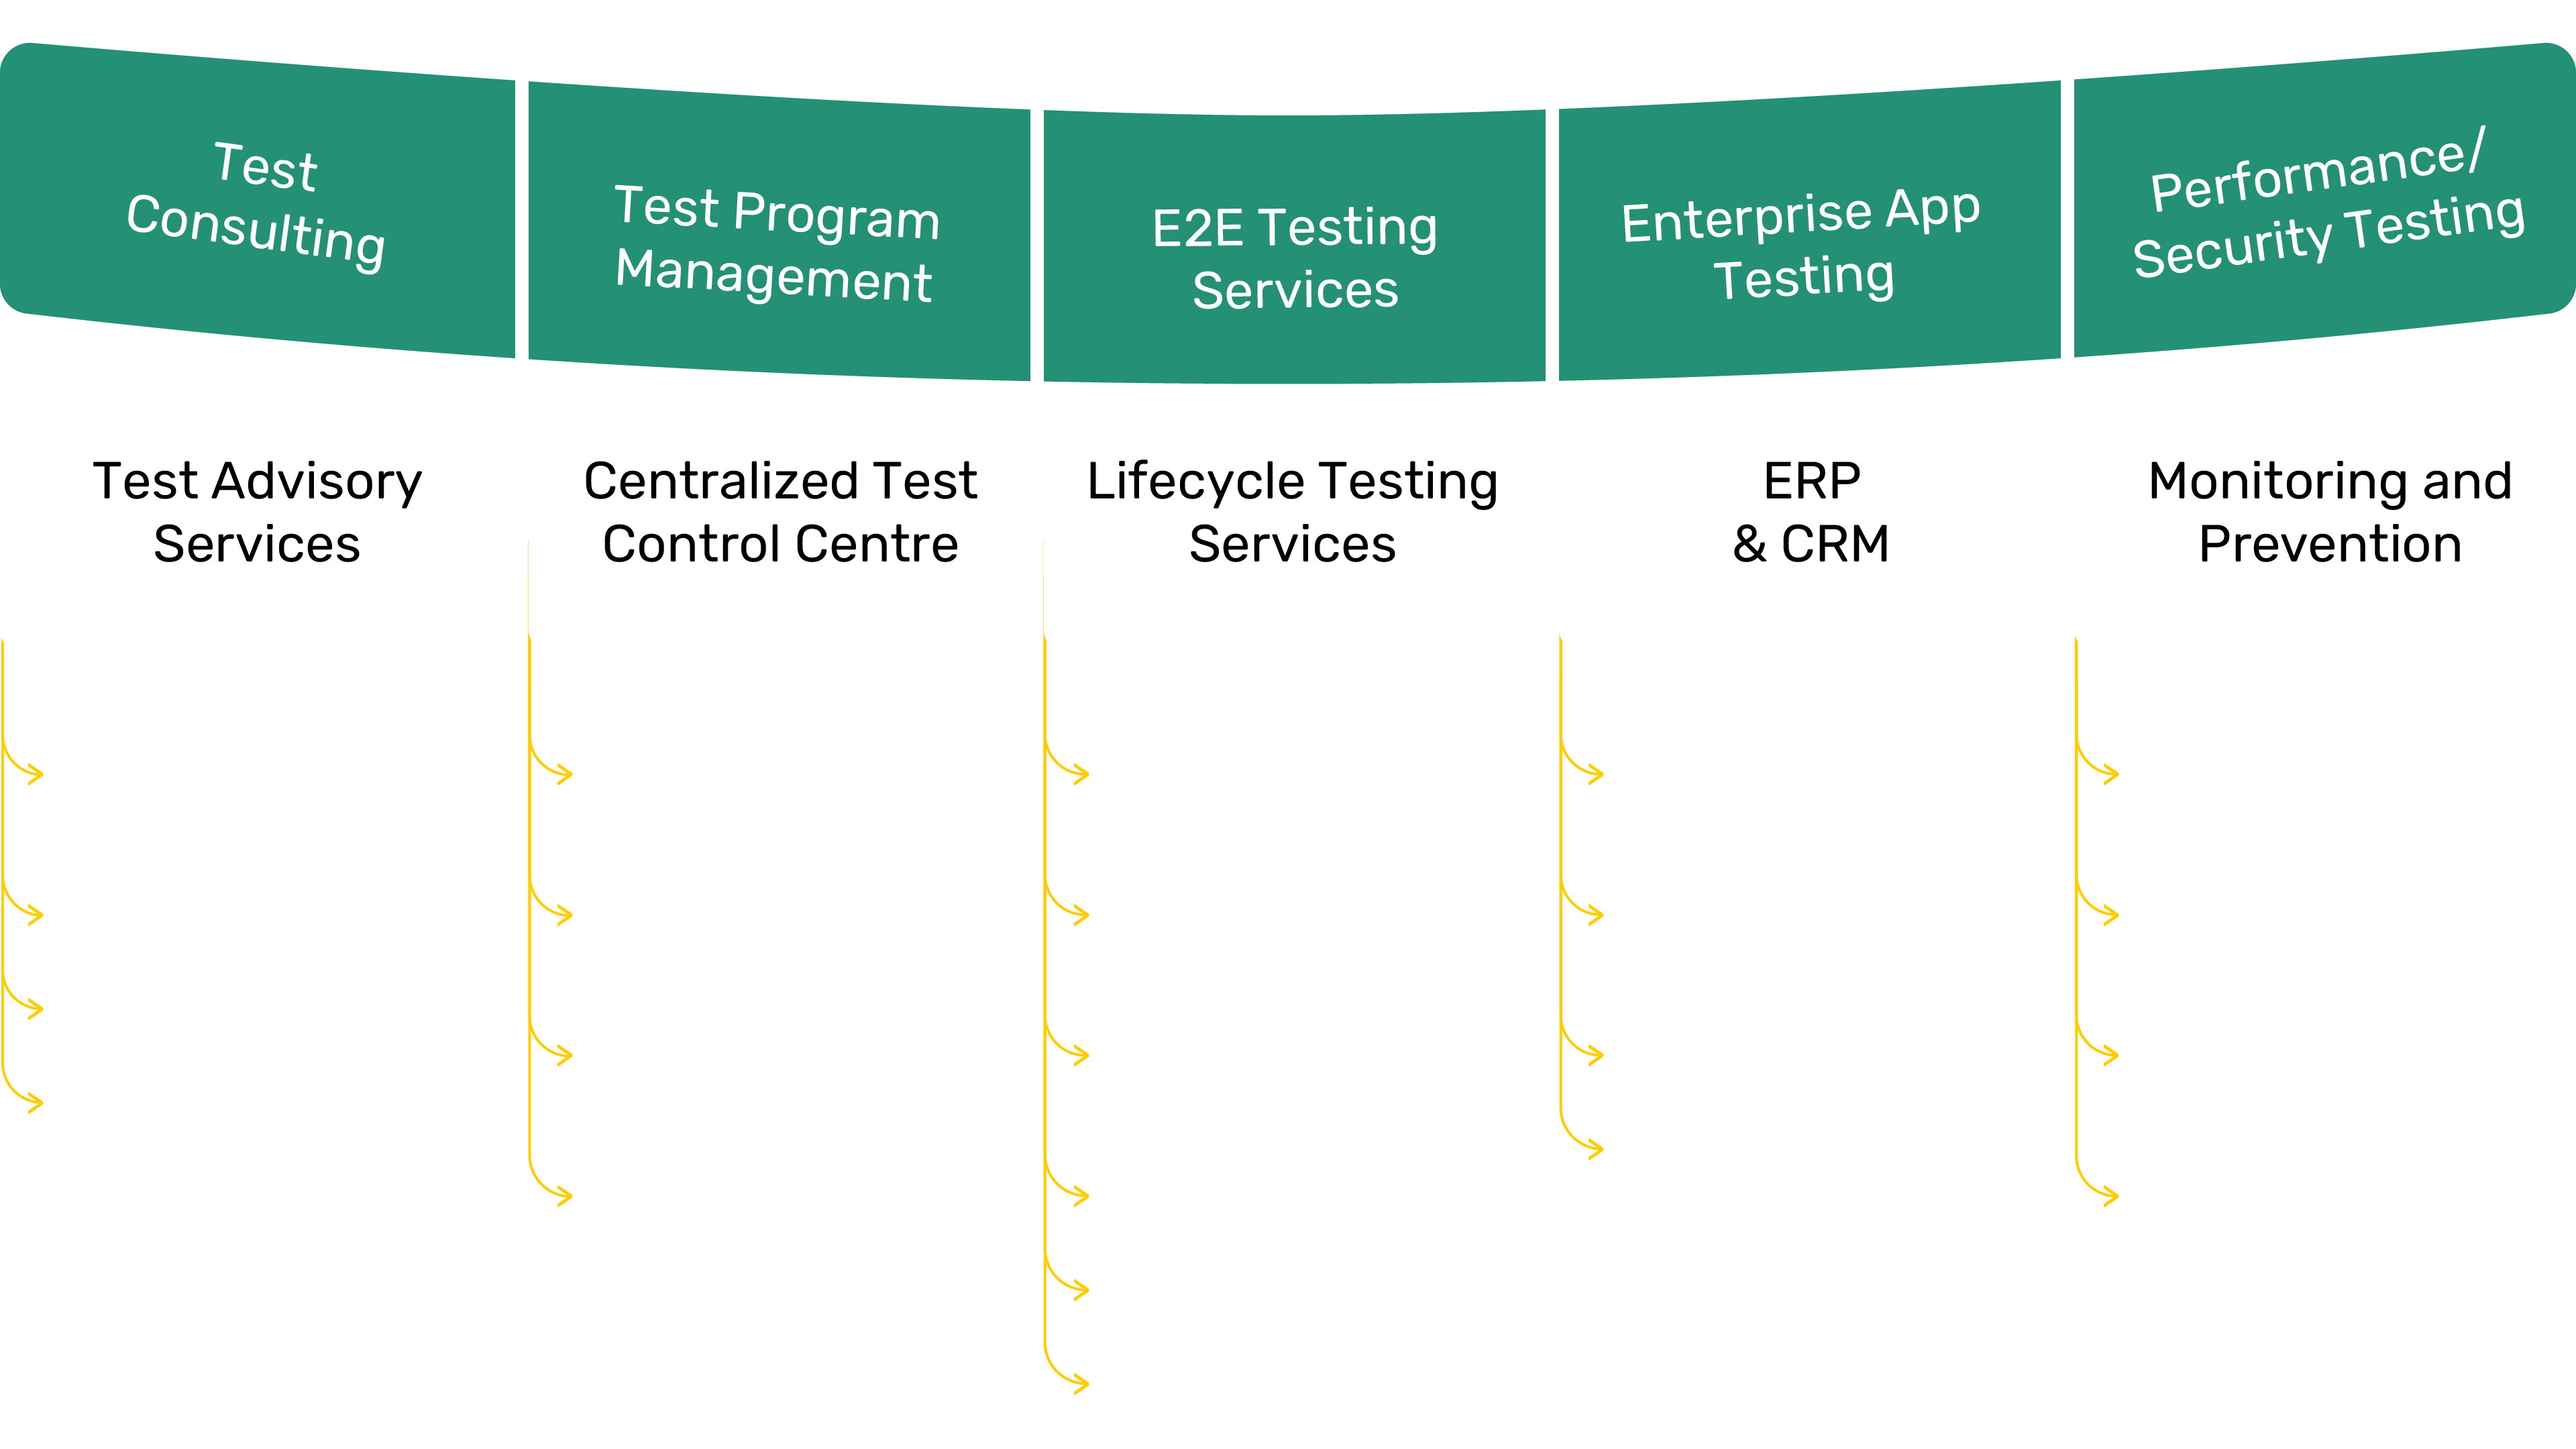 Testing Service Offerings